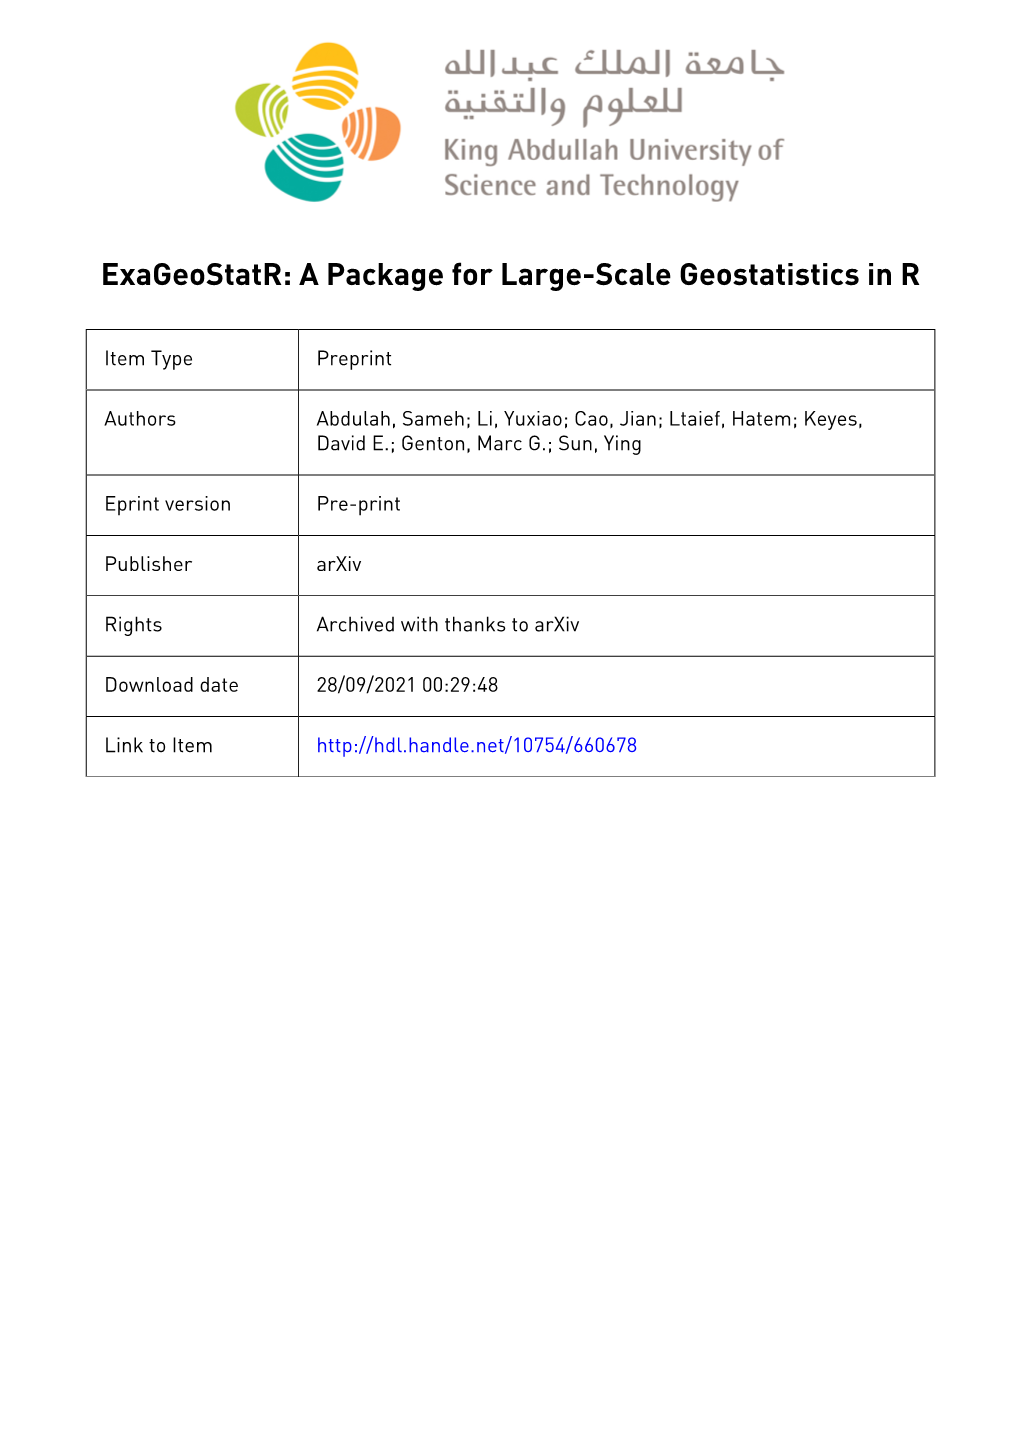 Exageostatr: an R Package for Large-Scale Geostatistics